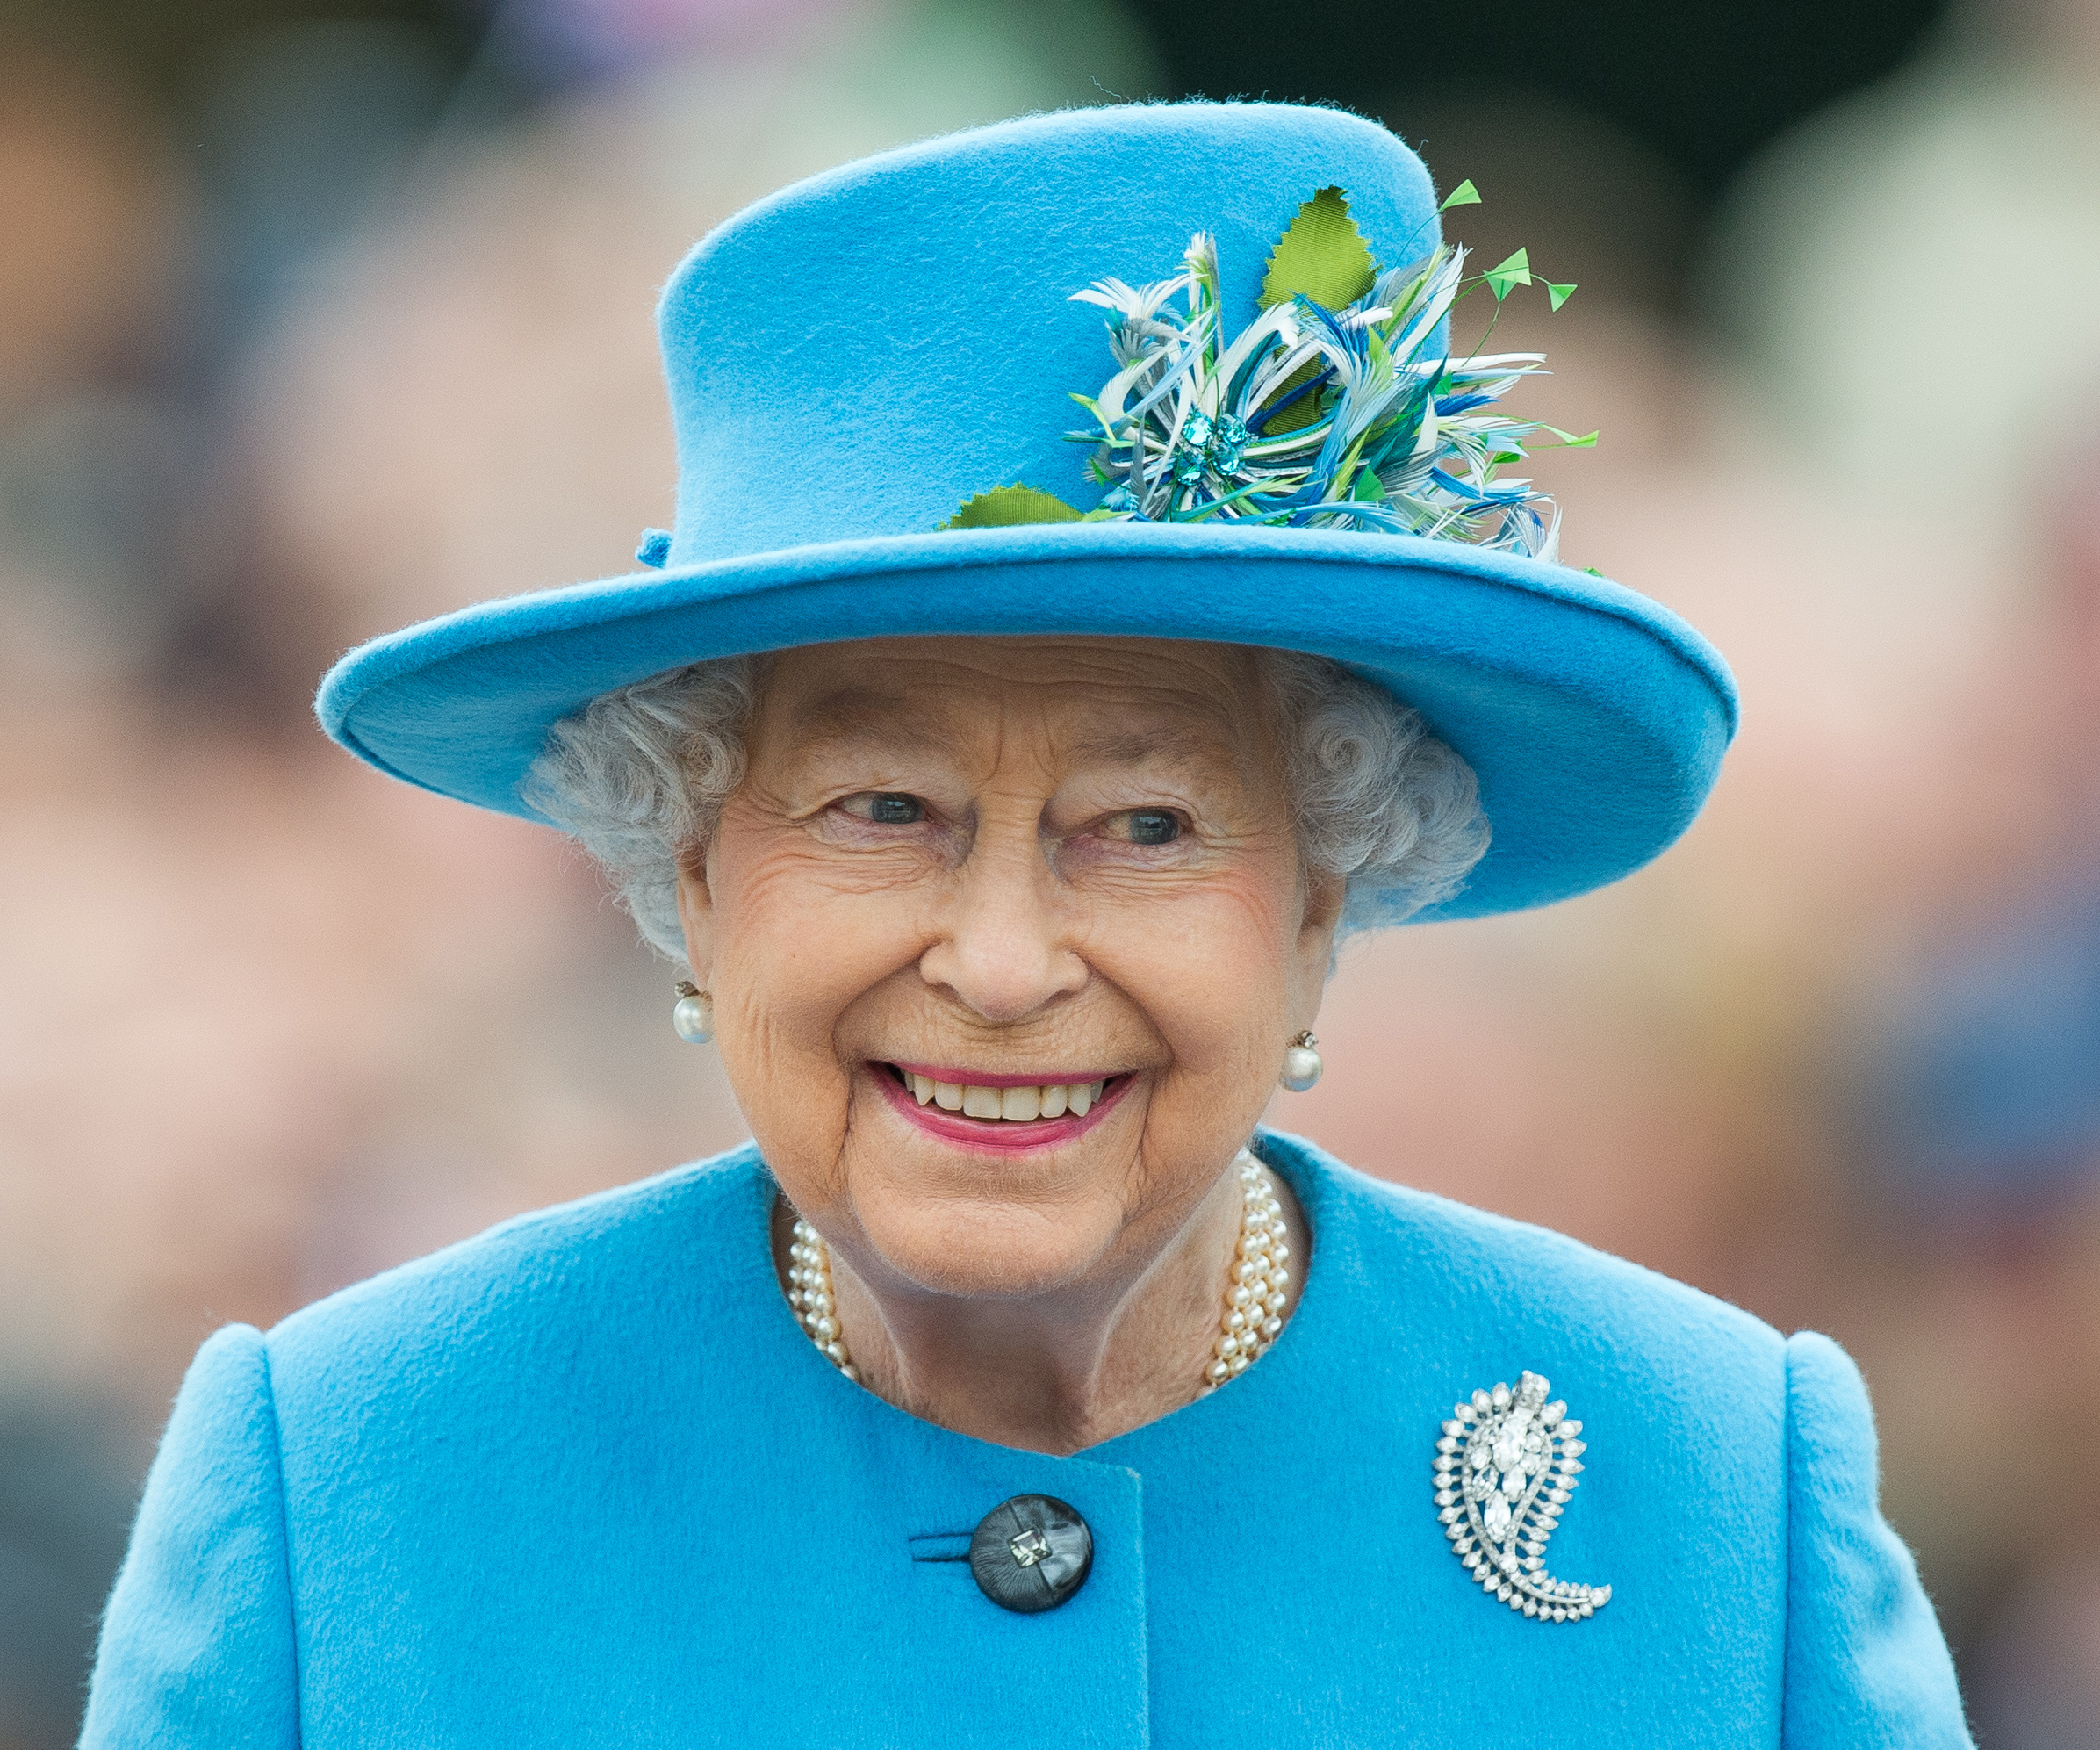 The real reason why The Queen wears super colourful outfits